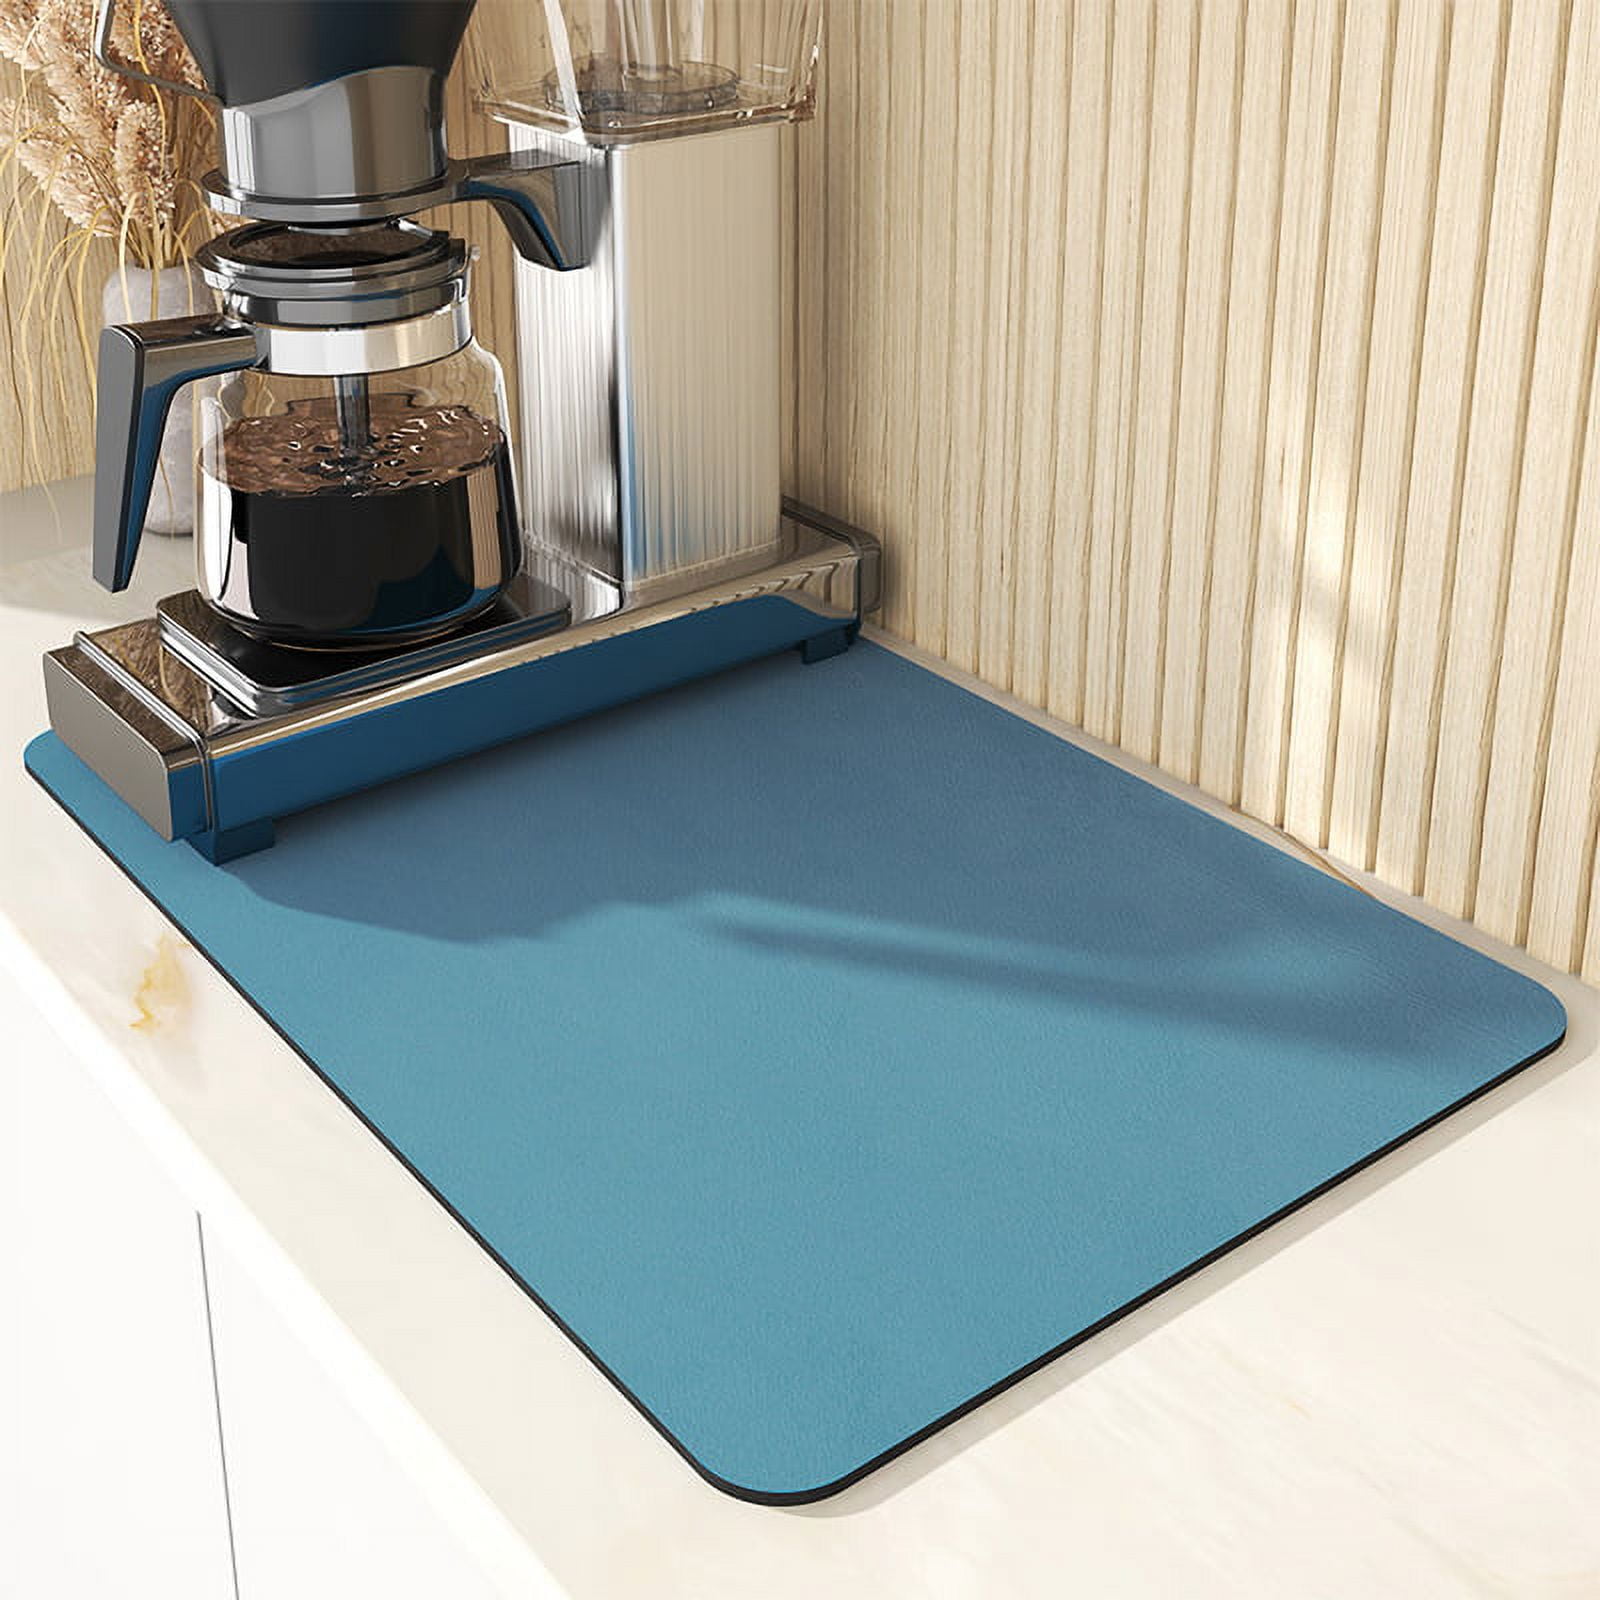 Drymate Coffee Maker Mat, Protects and Decorates Countertops - Absorbent,  Waterproof, Machine Washable & Reviews